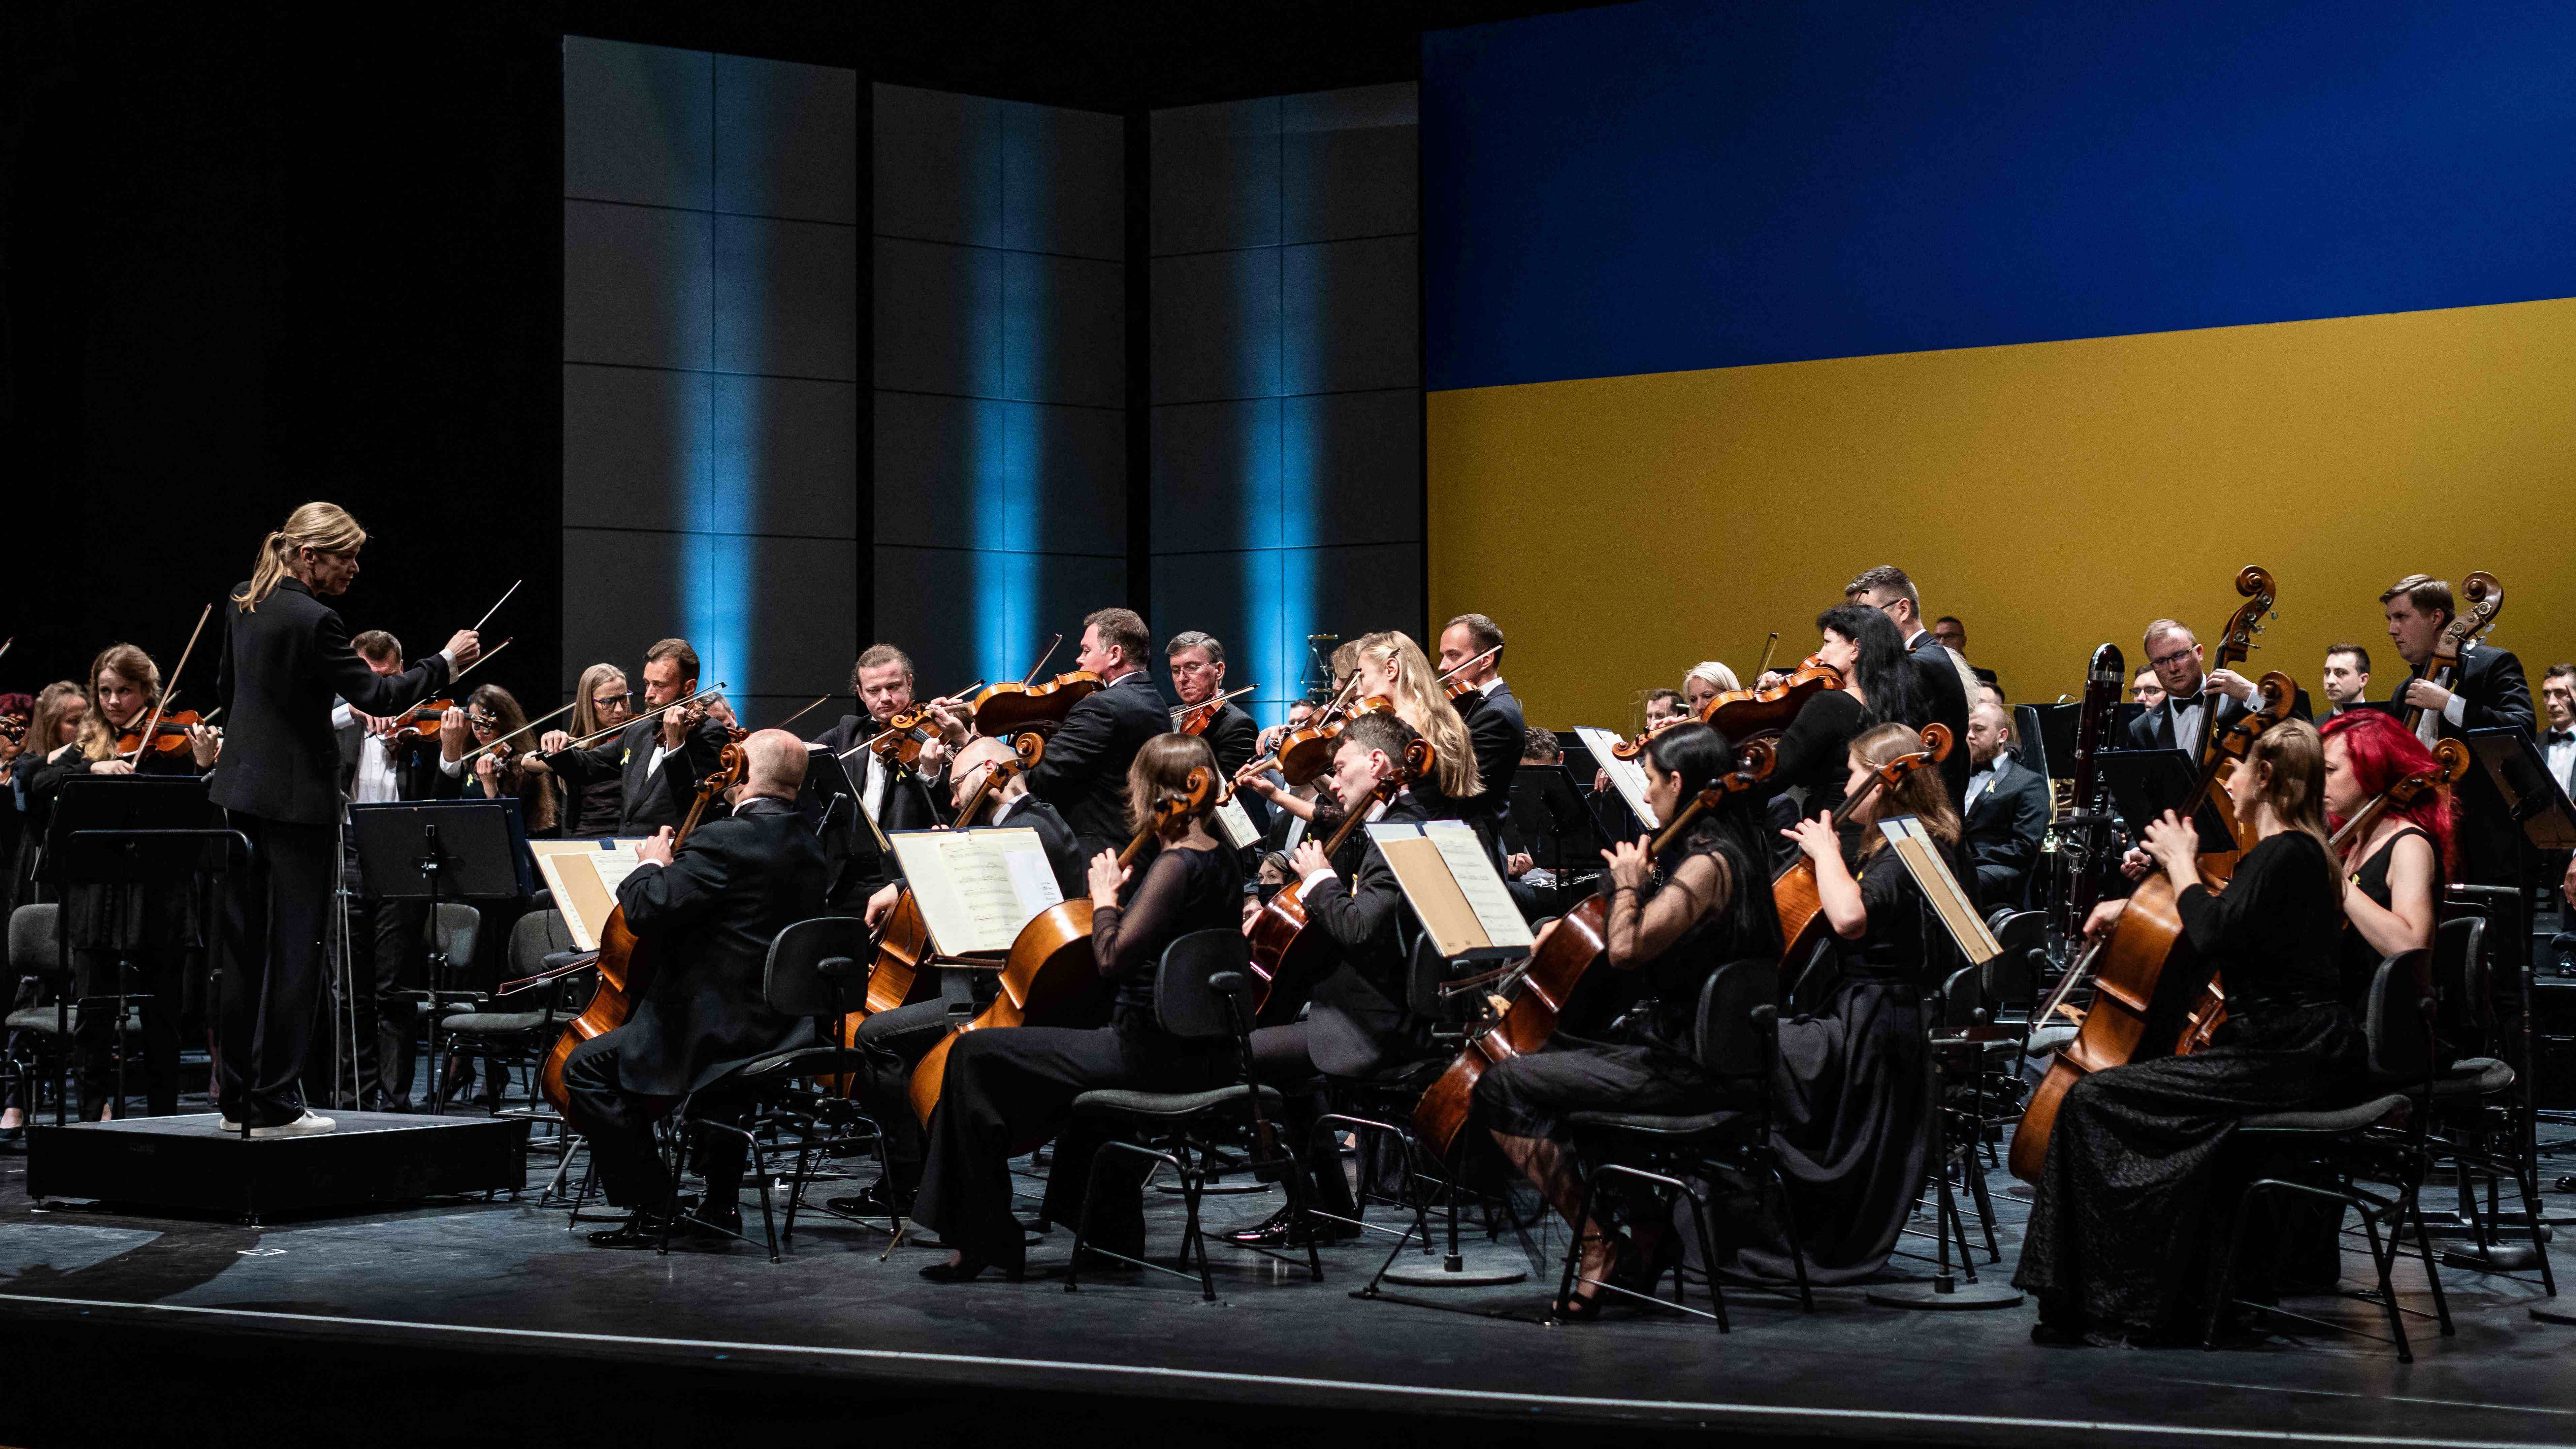 Musicians from the Ukrainian Freedom Orchestra lead by conductor Kerii-Lynn Wilson. Credit: AFP Photo